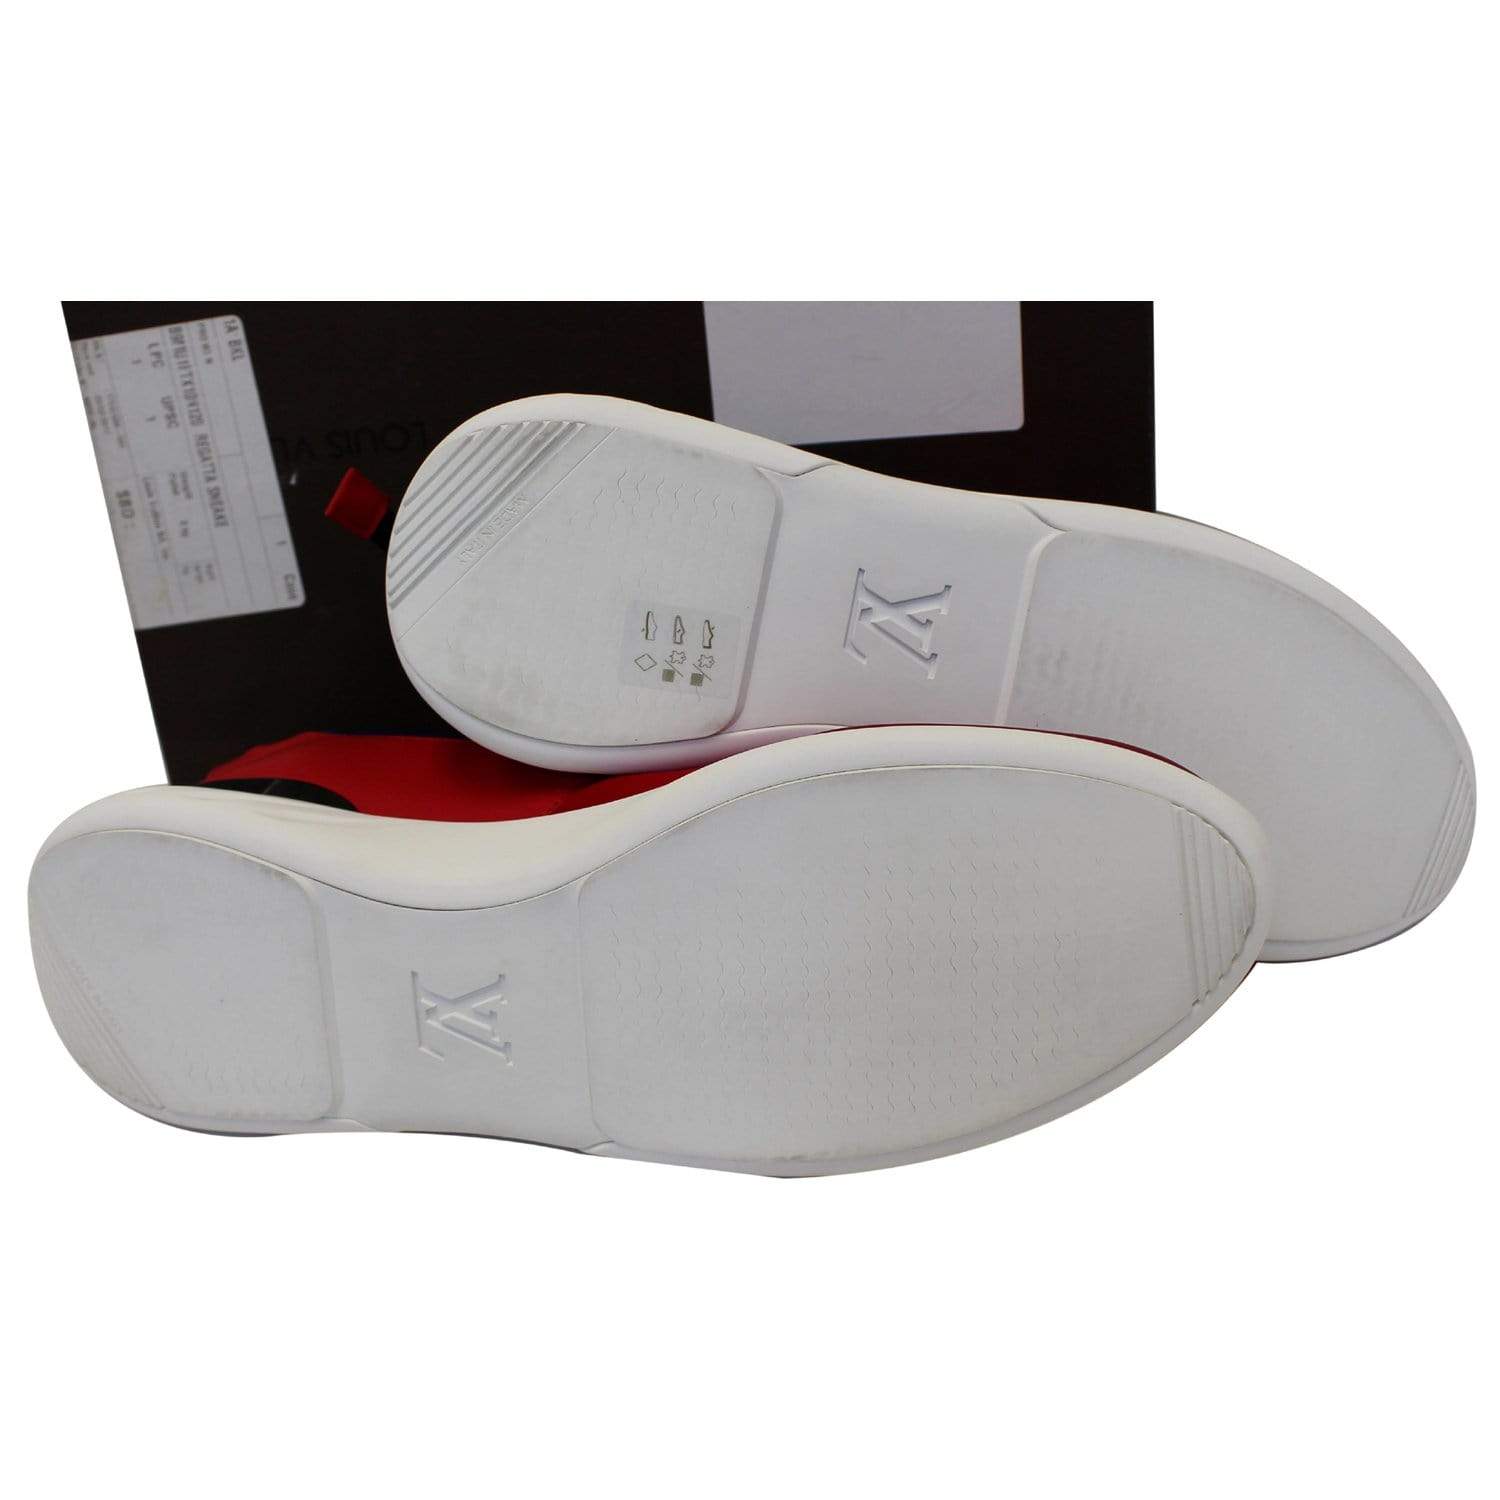 LOUIS VUITTON Cotton America's Cup 2017 Slip-On Sneakers Grey - 42 (8) -  Limited Edition | Luxity